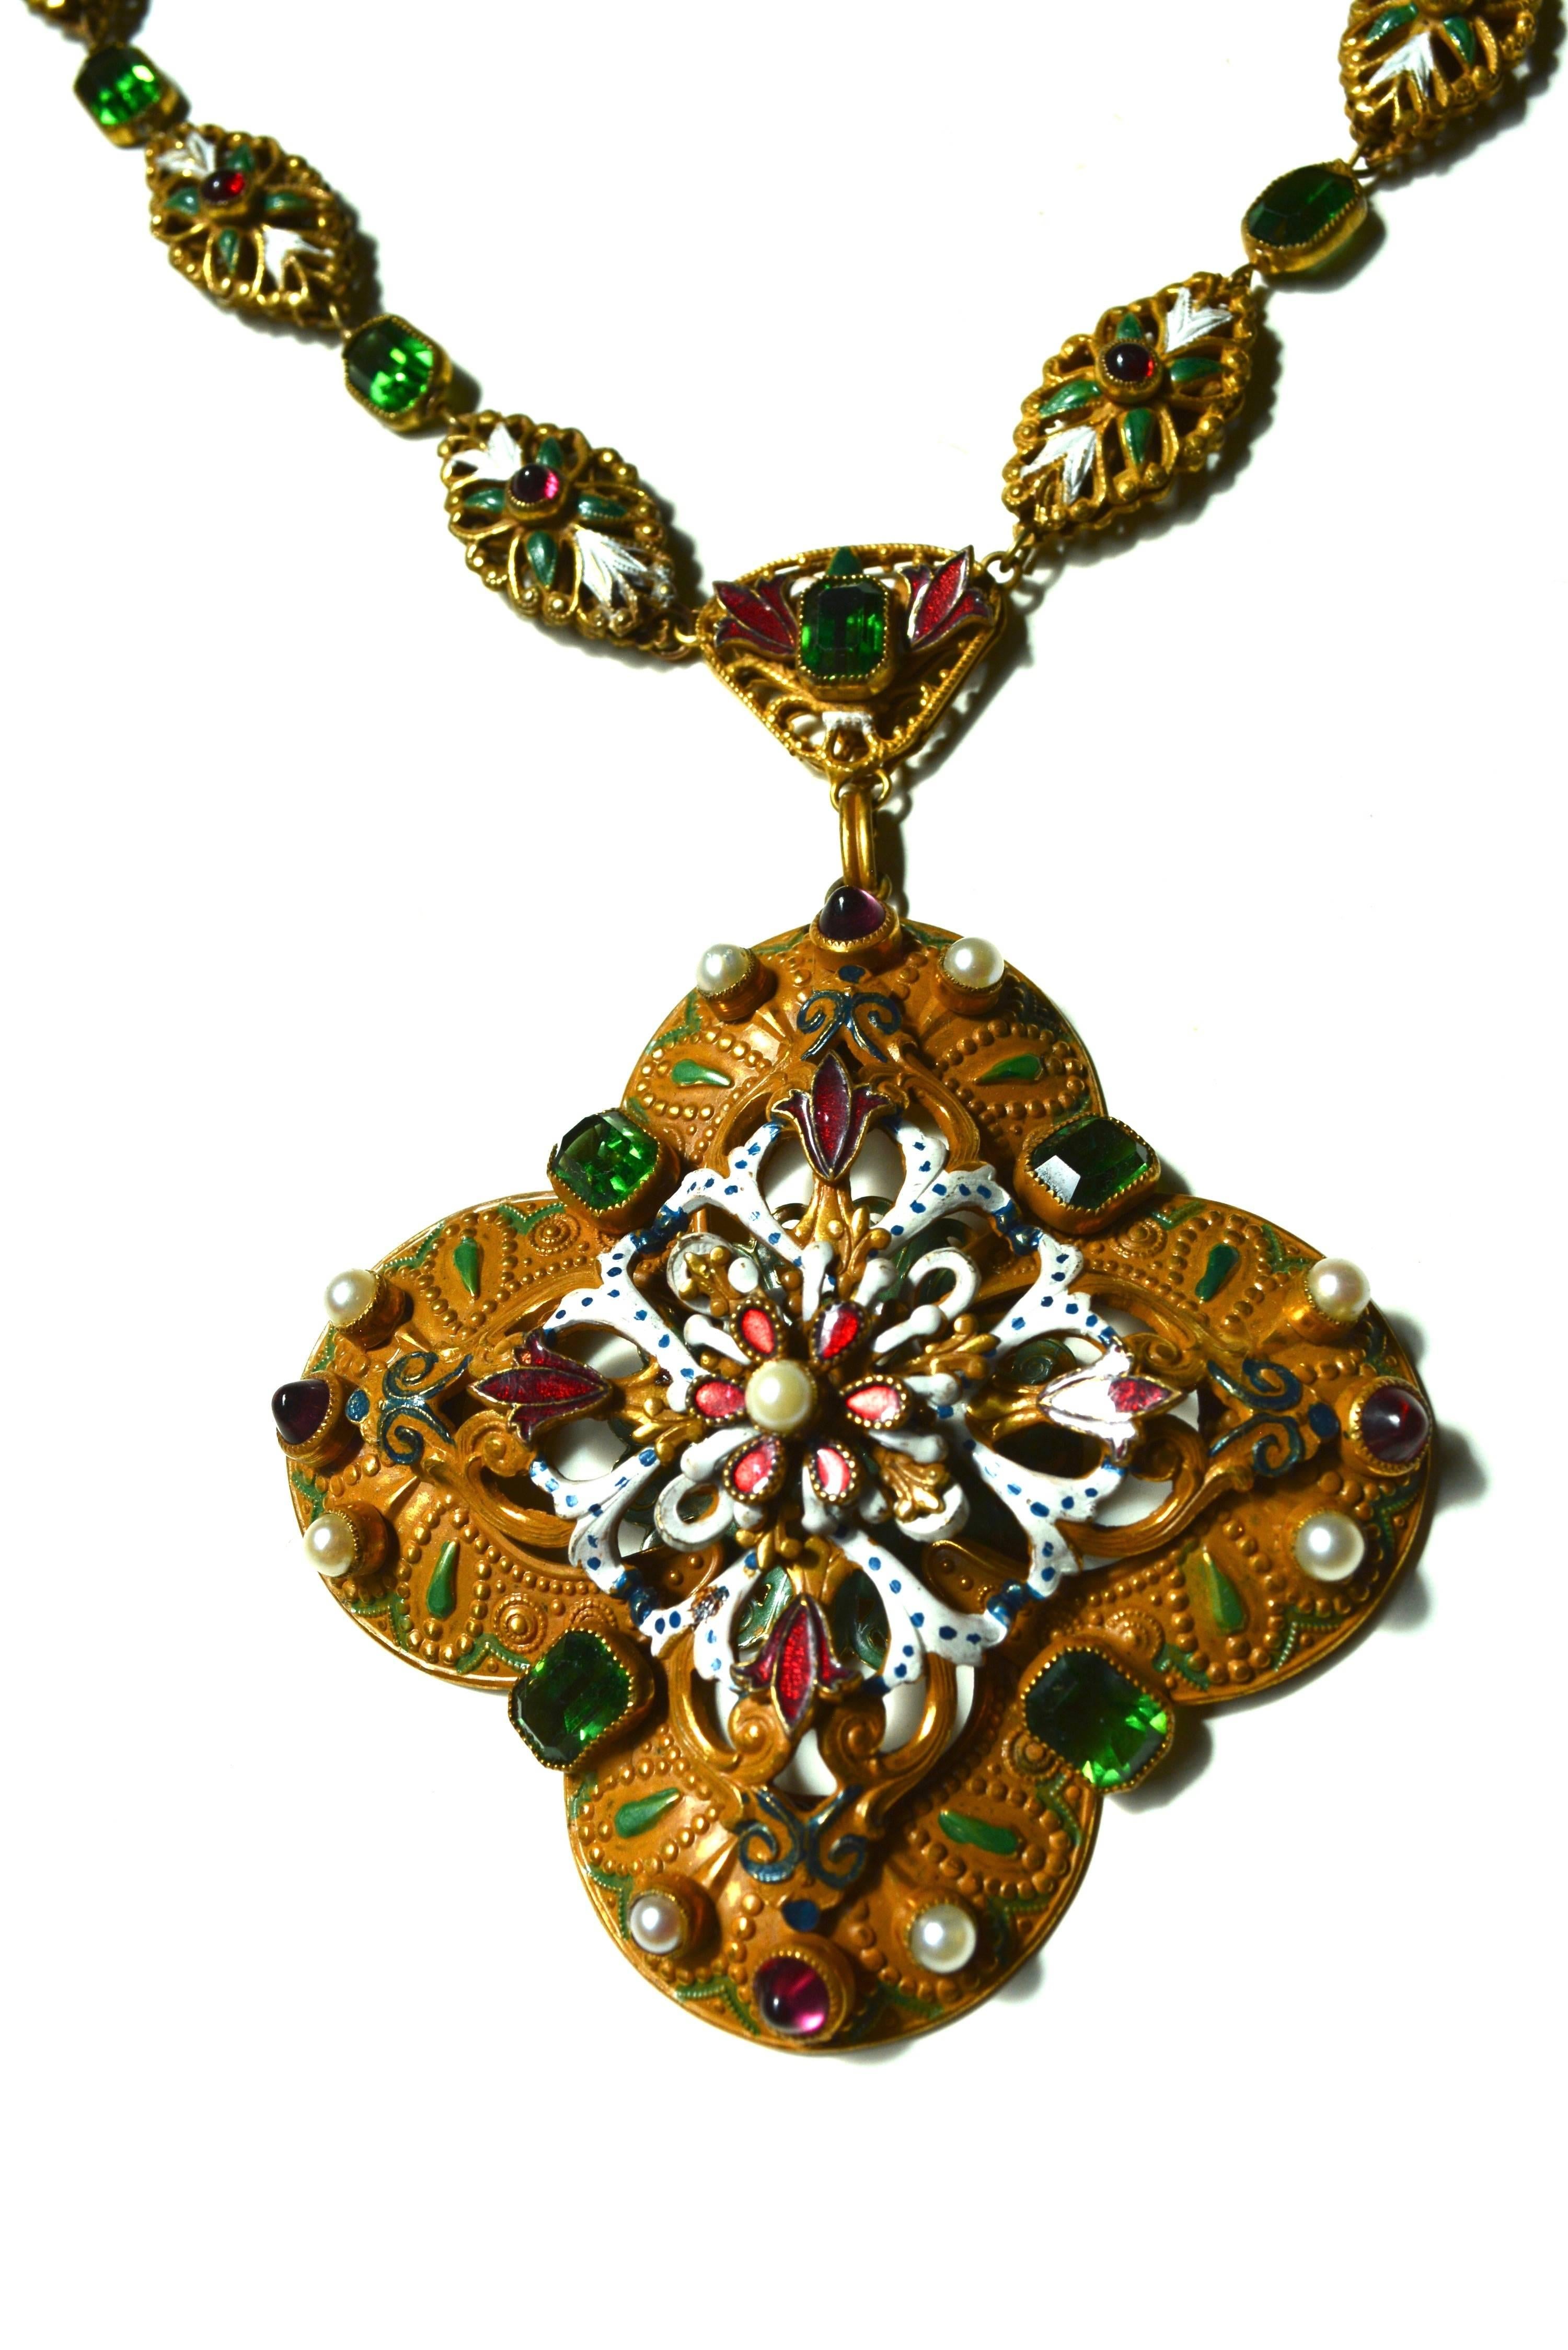 Signed enamel and gilt Hobe larger Austro-Hungarian necklace and earrings. The piece is in very good condition with minor enamel wear. The earrings are good but one is slightly open on the side, see images. Circa 1940s.  16